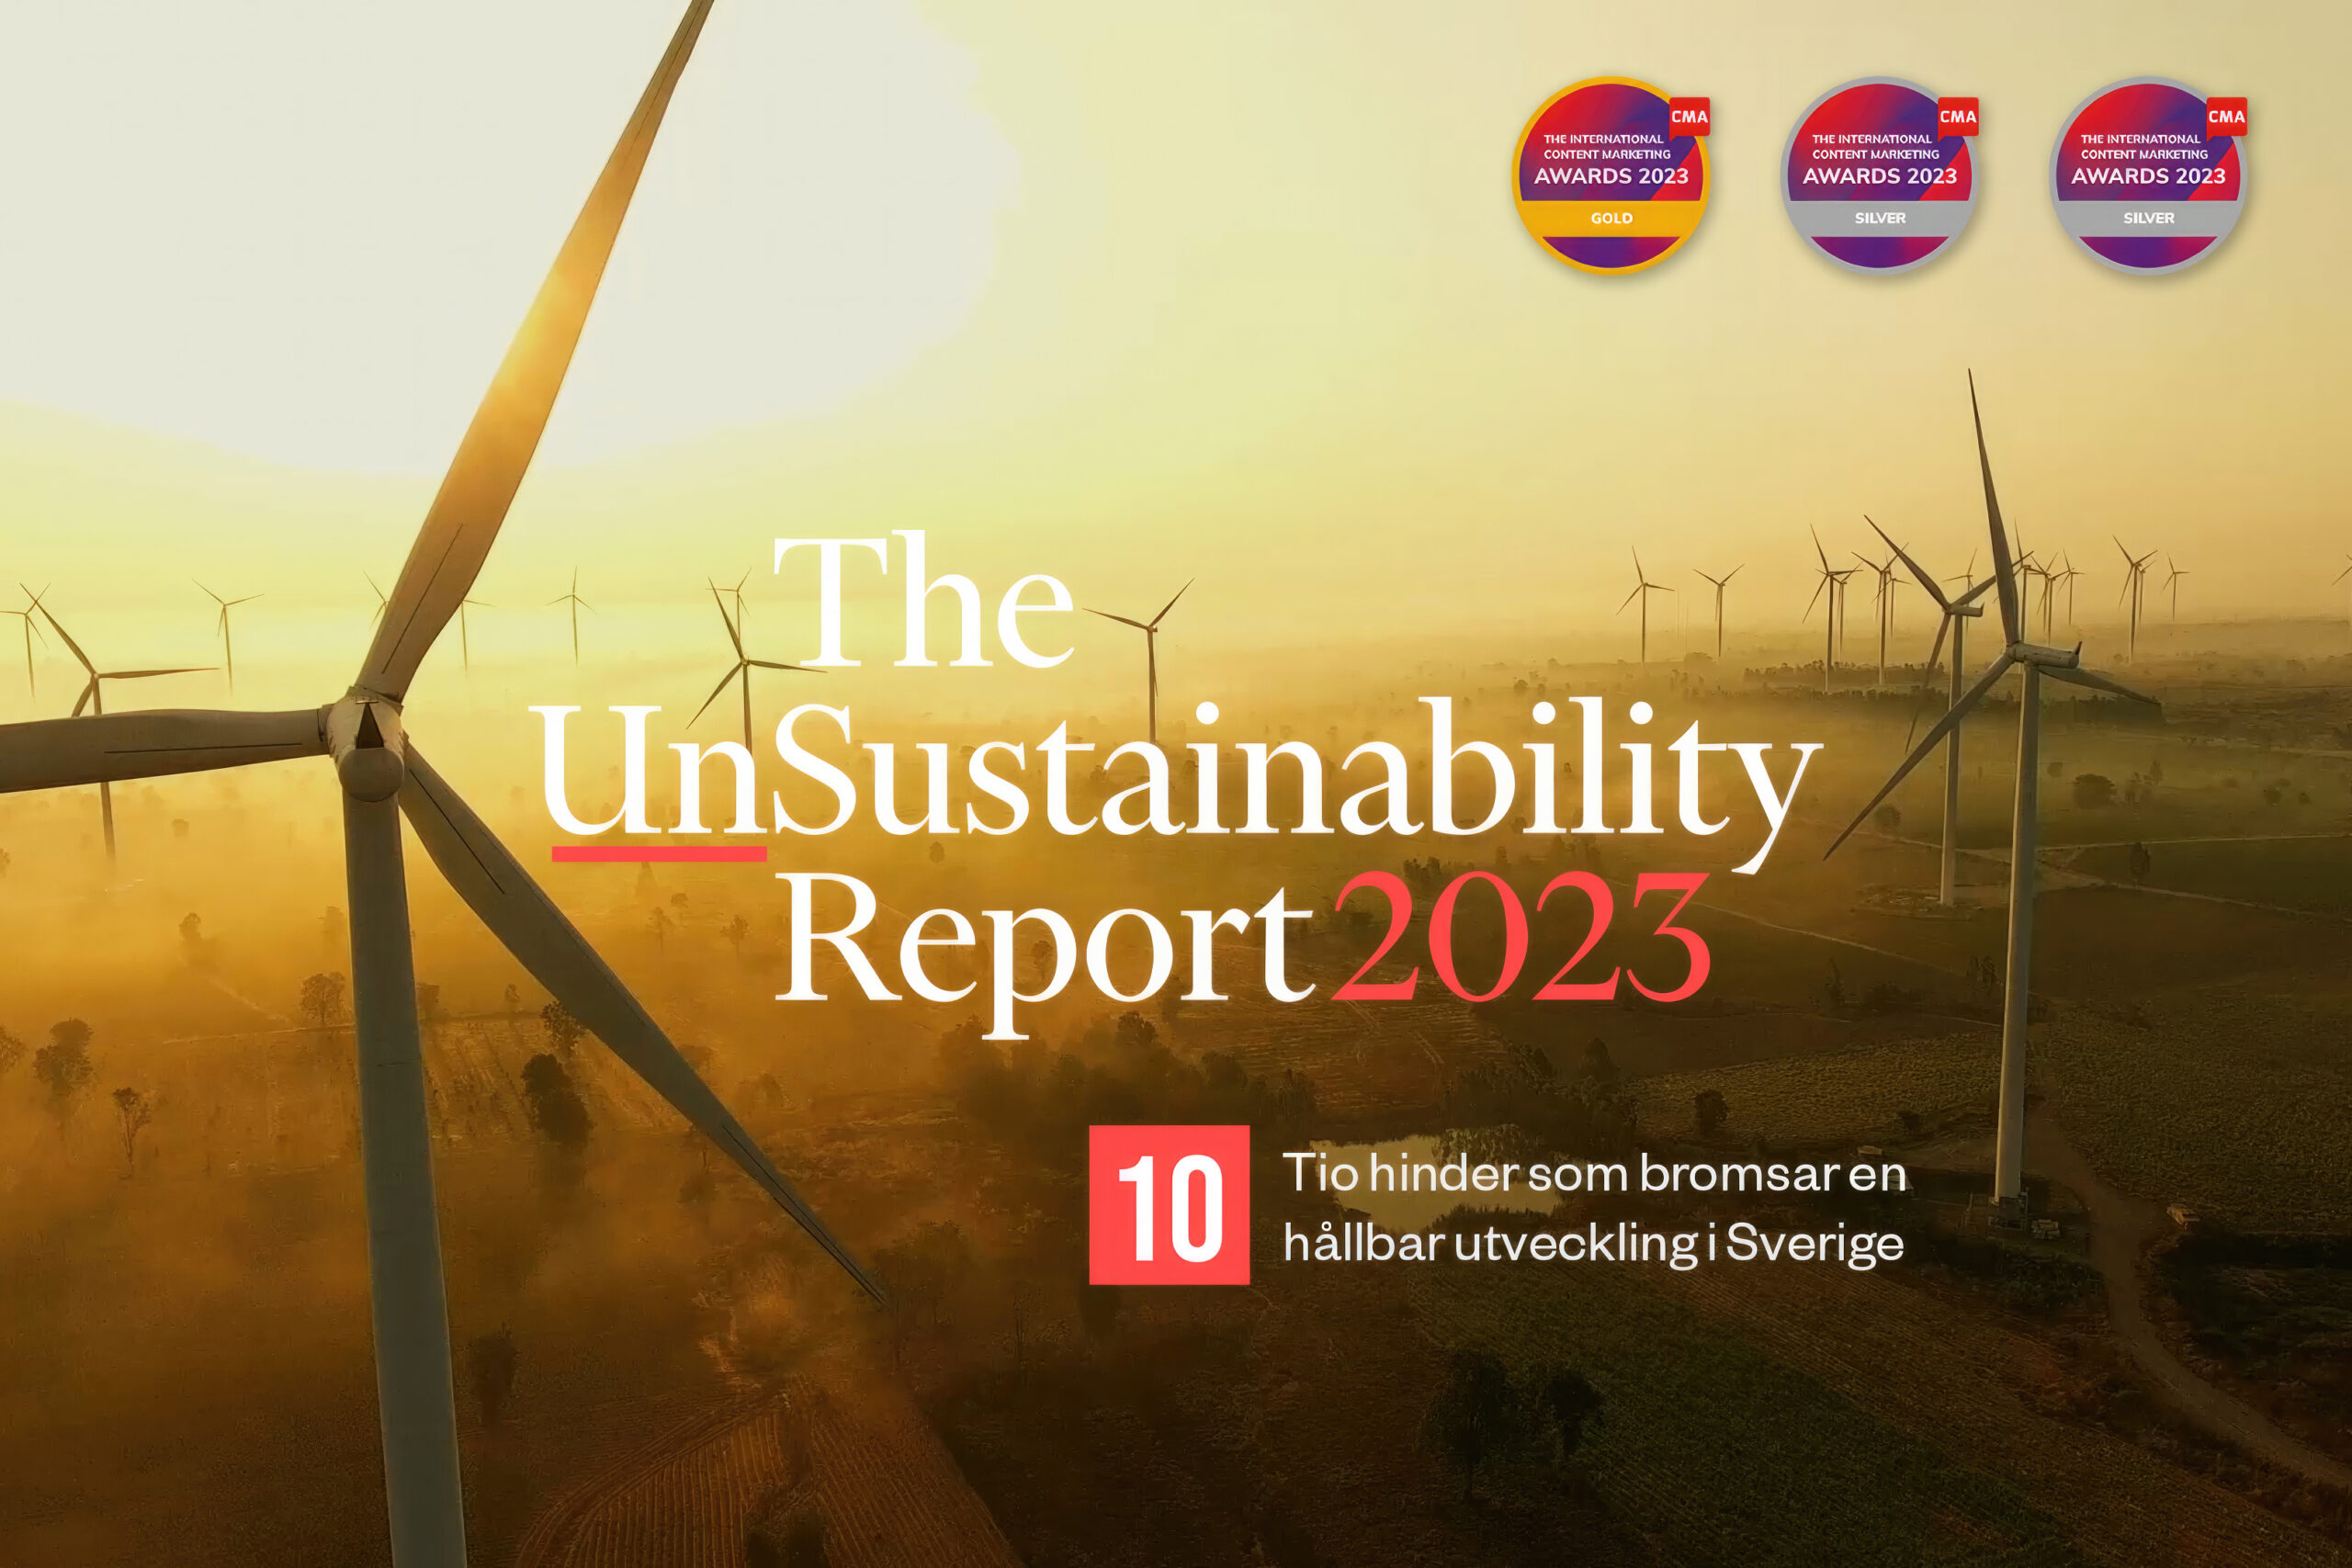 The UnSustainability Report